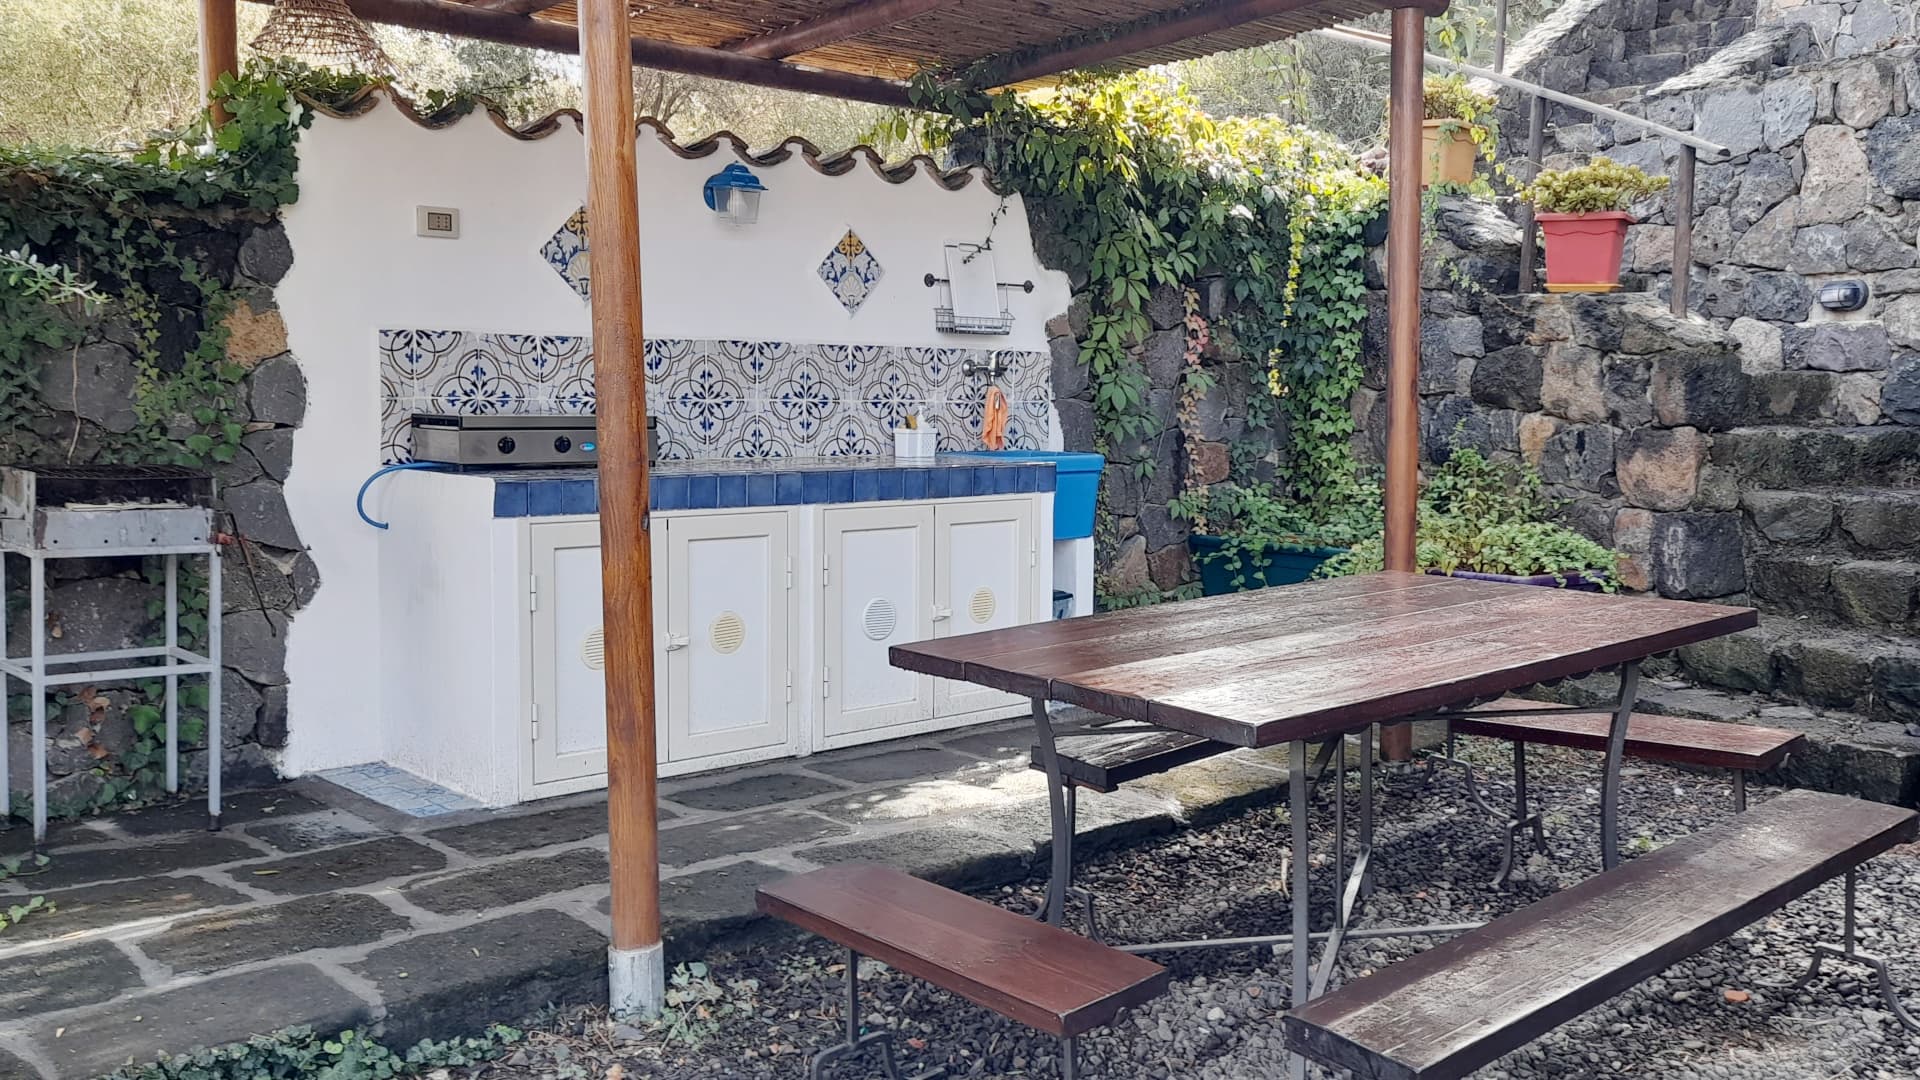 shared space, open air kitchen